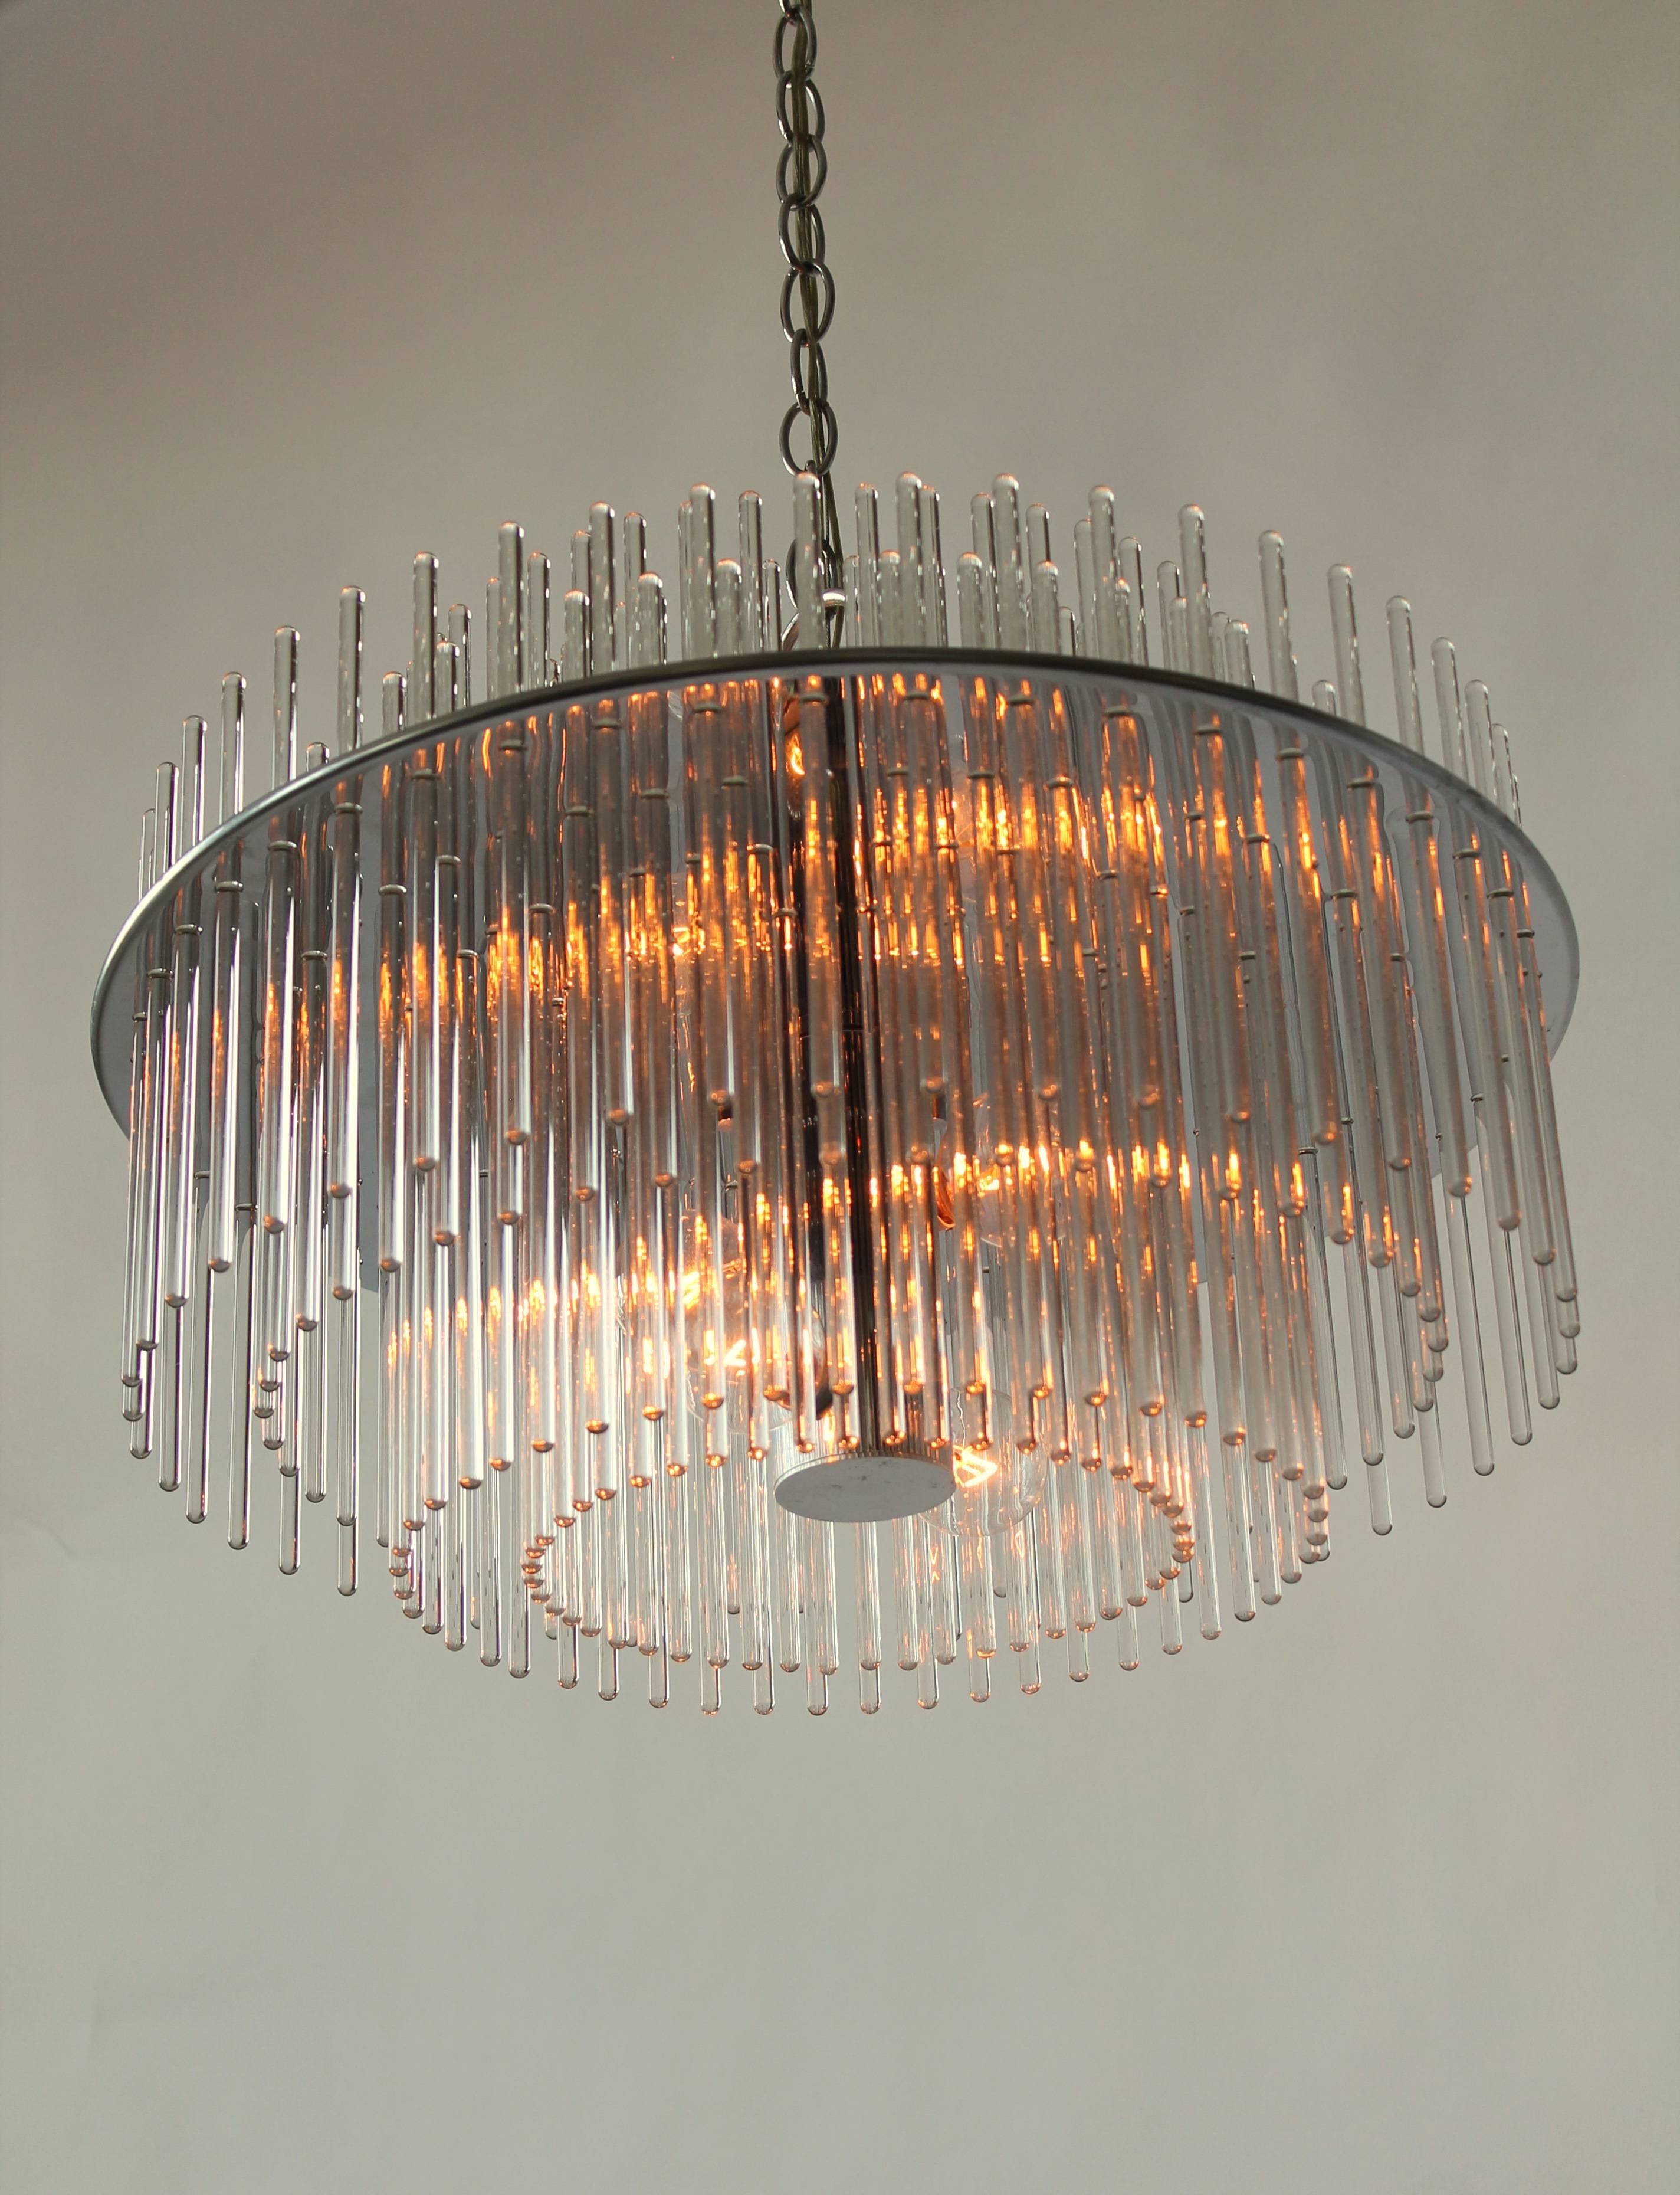 Classic 1980s Lightolier chandelier from their Radiance line.

Four row of light catching optical quality glass rods sitting on a nickel-plated pierced steel-plate.

Well made solid construction.

6 E12 candelabrum size socket rated at 40